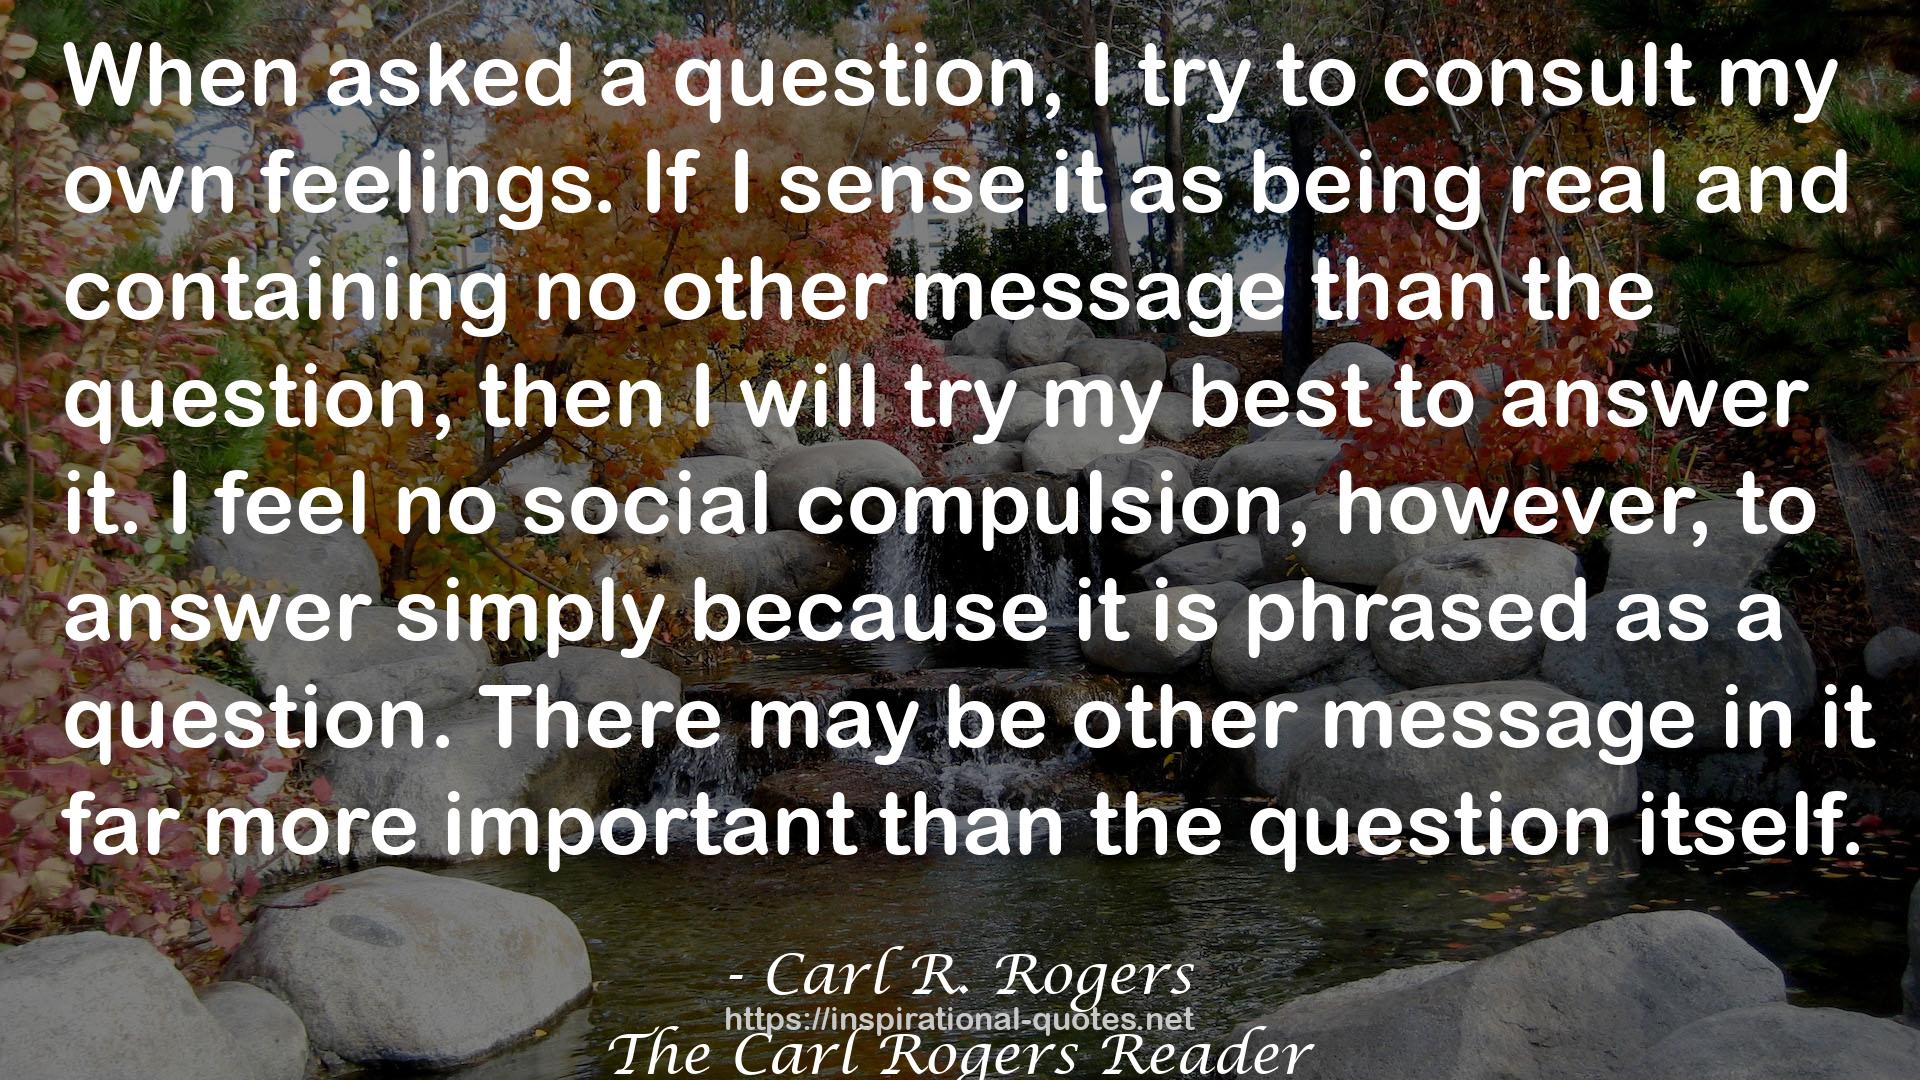 The Carl Rogers Reader QUOTES